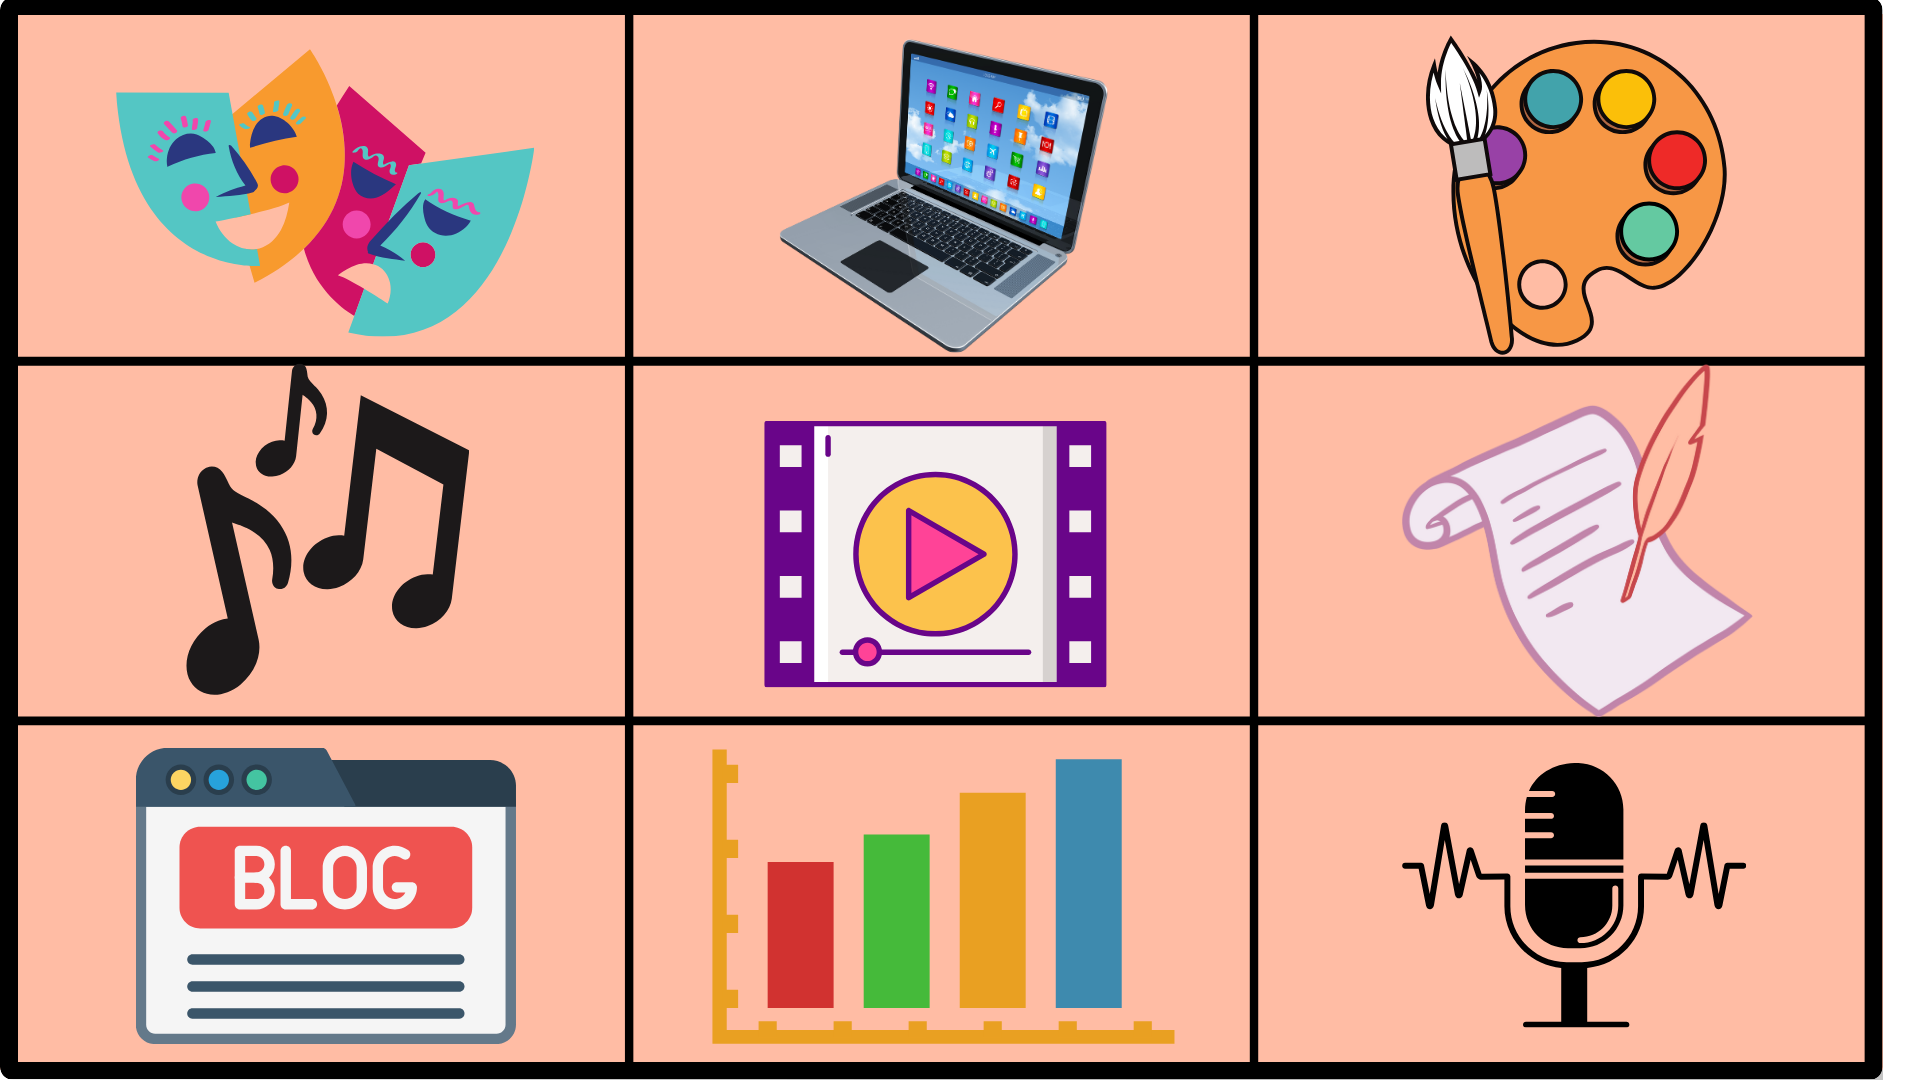 decorative image of a choice board with 9 squares. General clipart includes from top left- drama masks, laptop, art palette, musical notes, video symbol, quiz and parchment paper, online blog, bar graph, and microphone